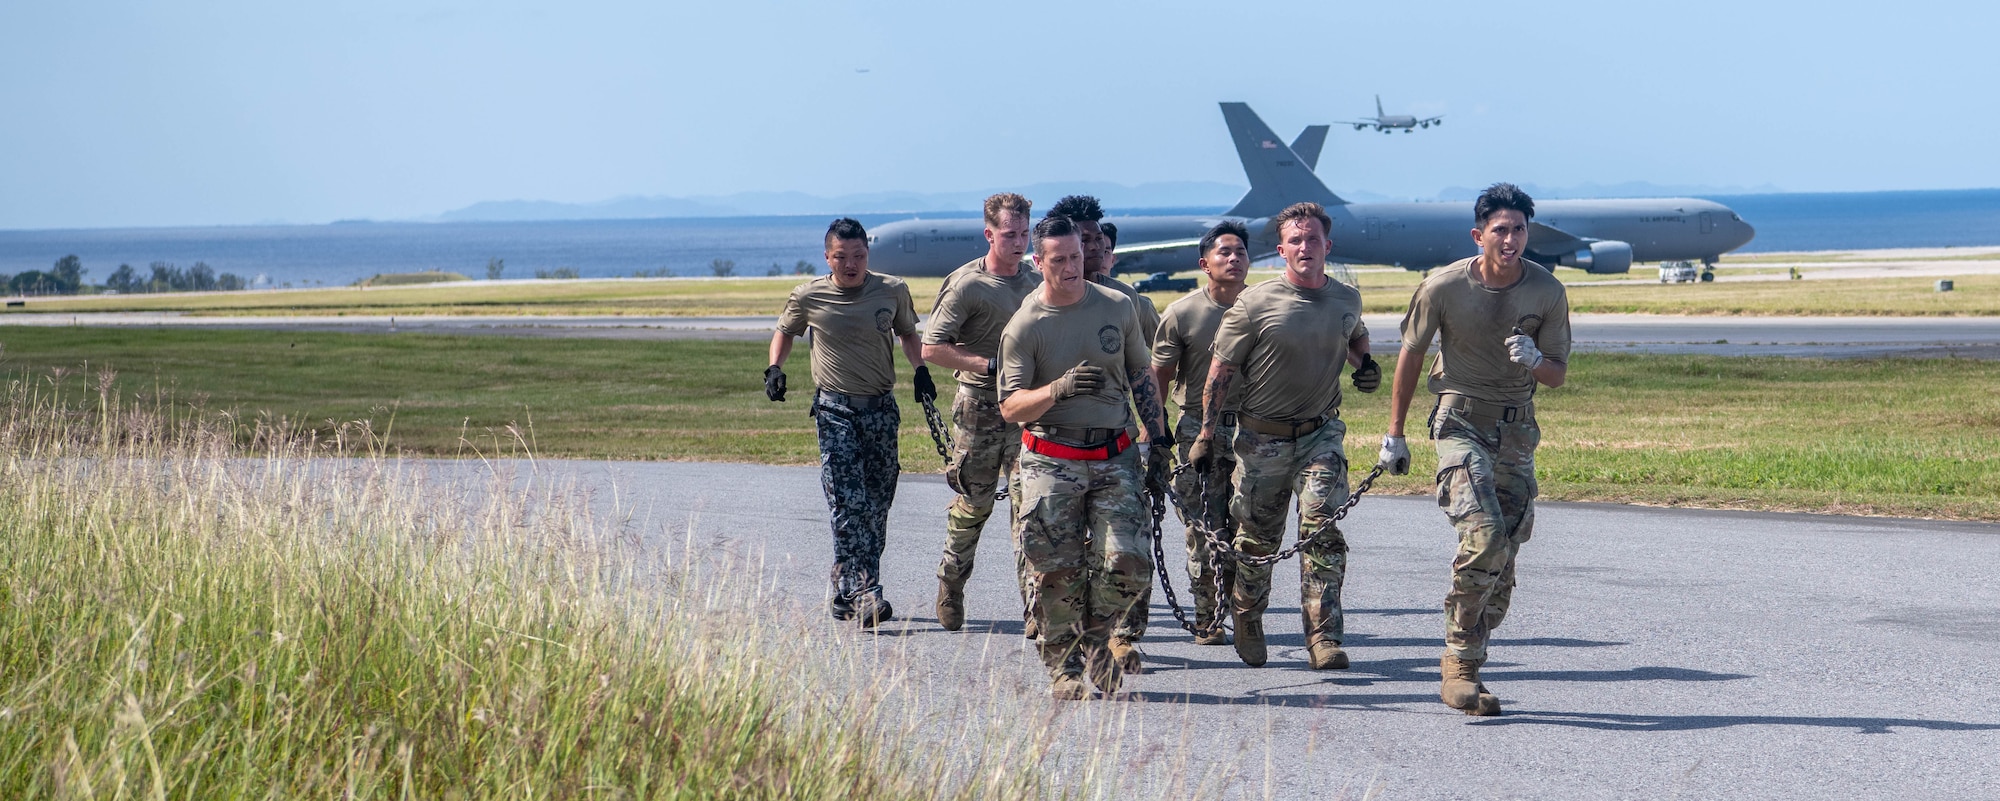 Japan Air Self-Defense Force and 733rd Air Mobility Squadron run alongside flight line for physical training